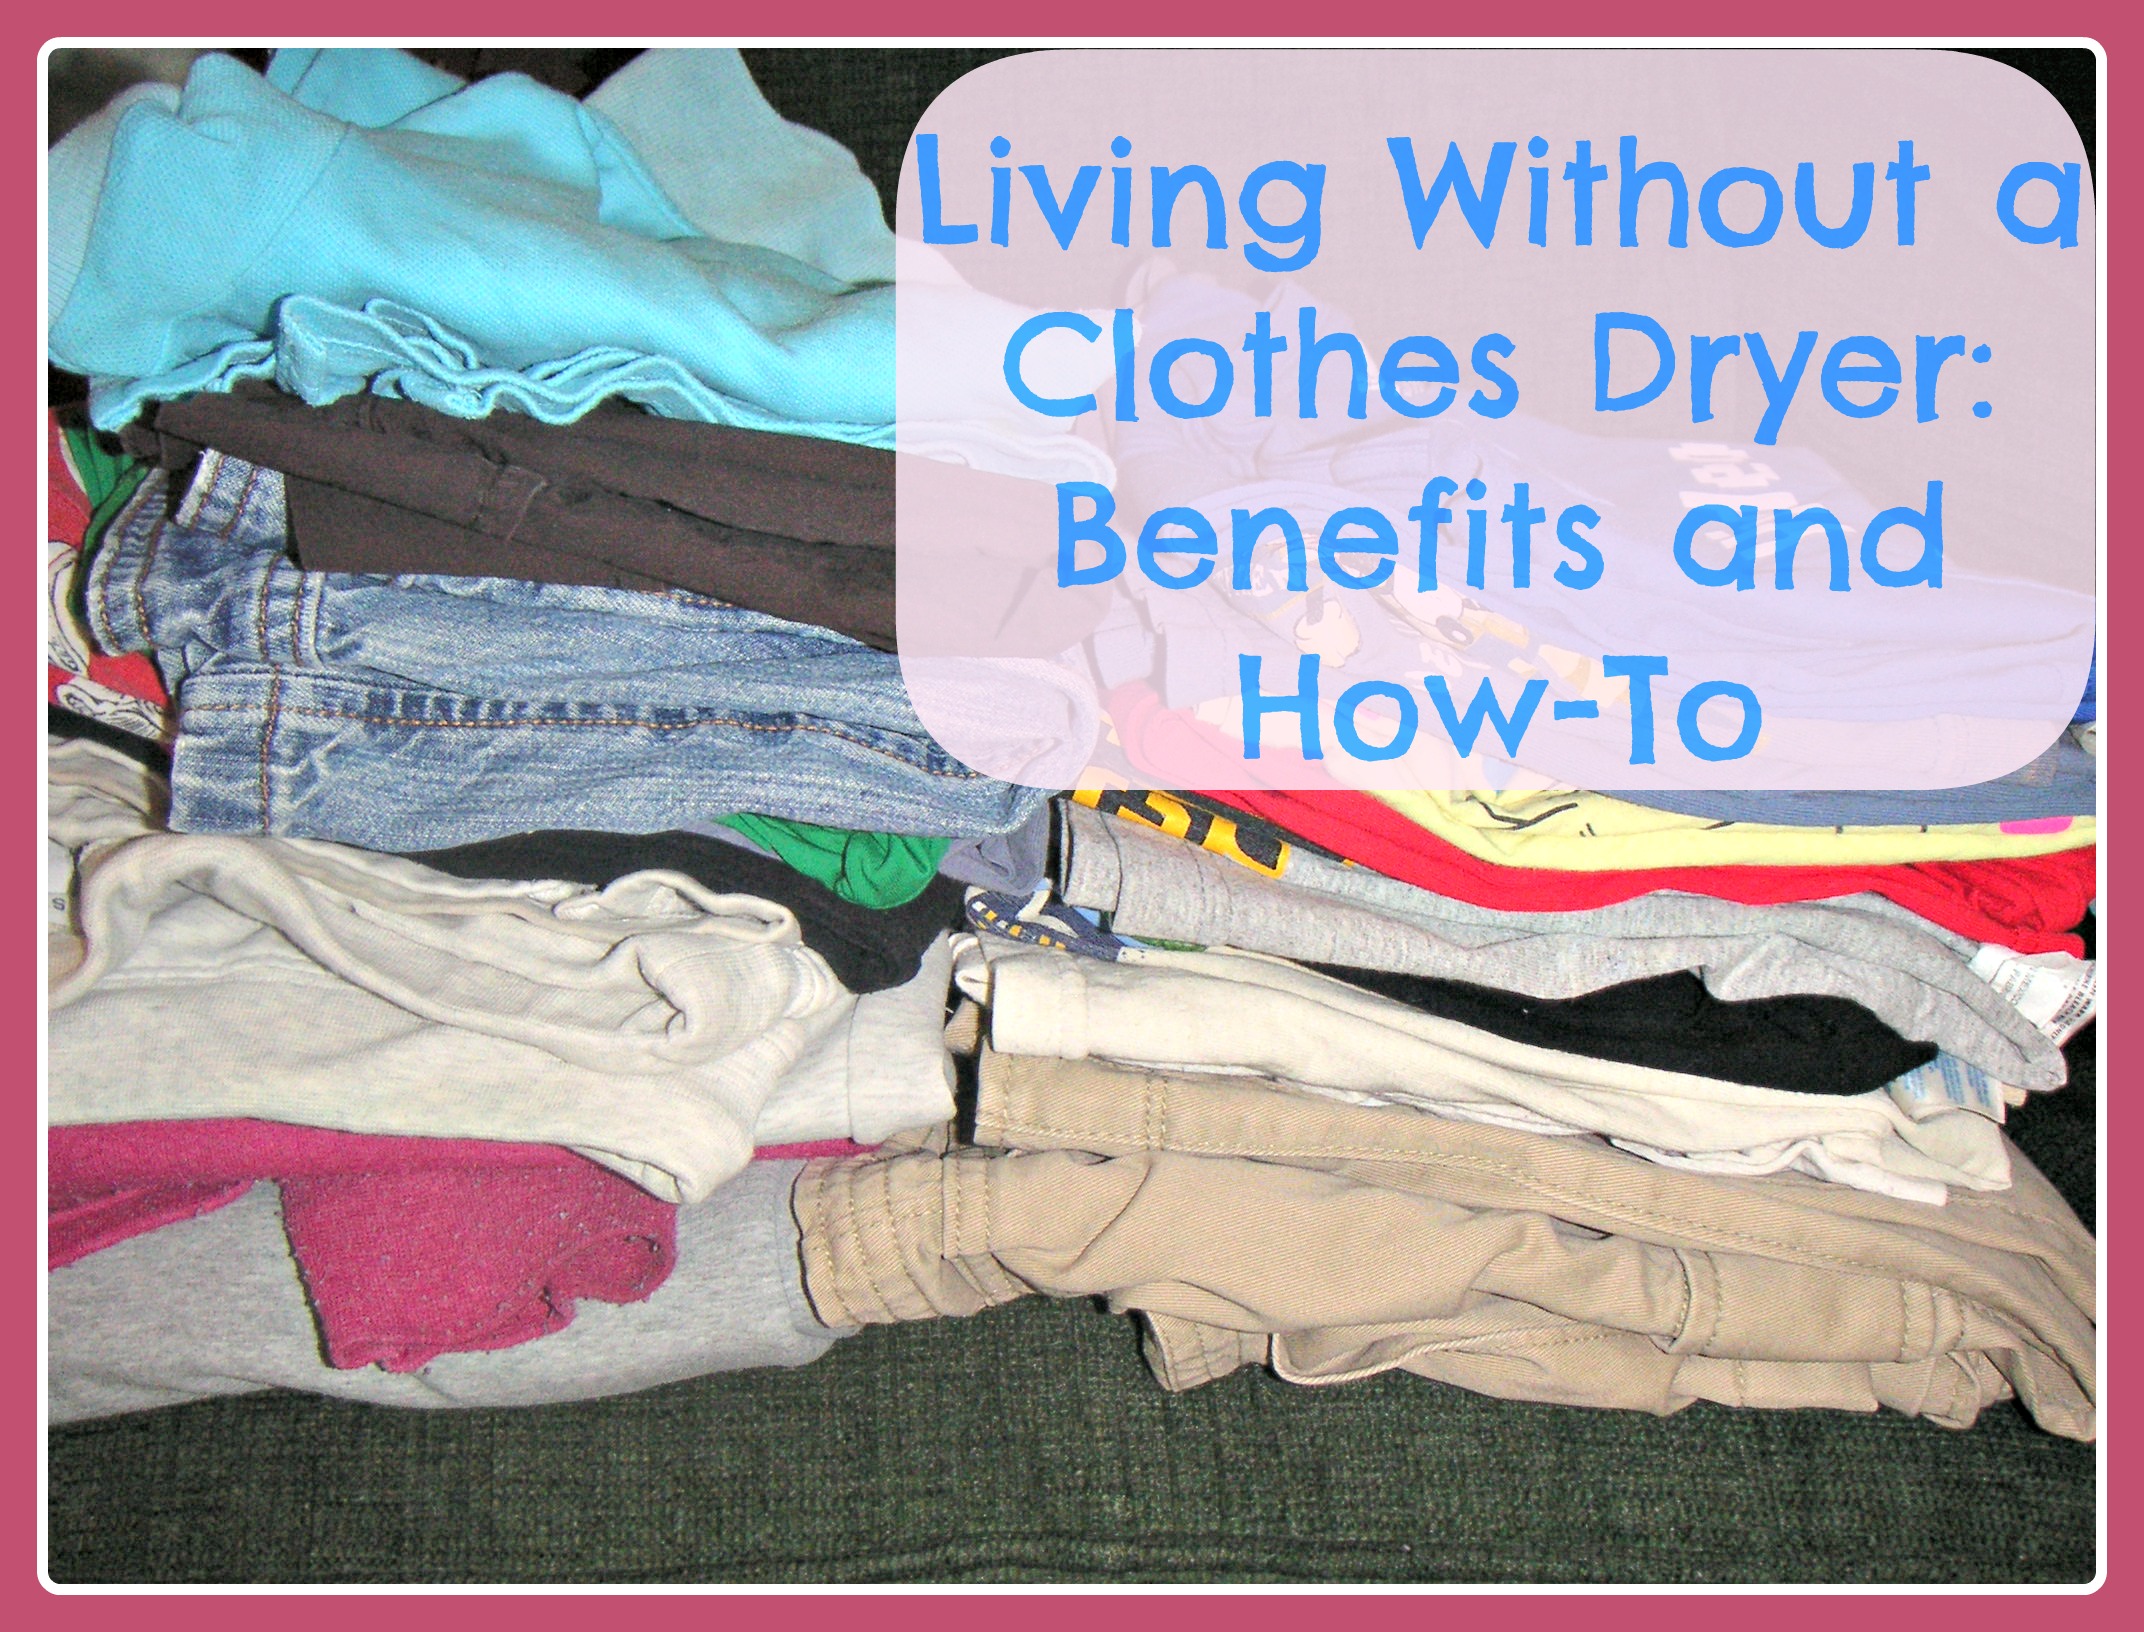 Drying Laundry Without a Dryer: My Drying Racks and Indoor ...